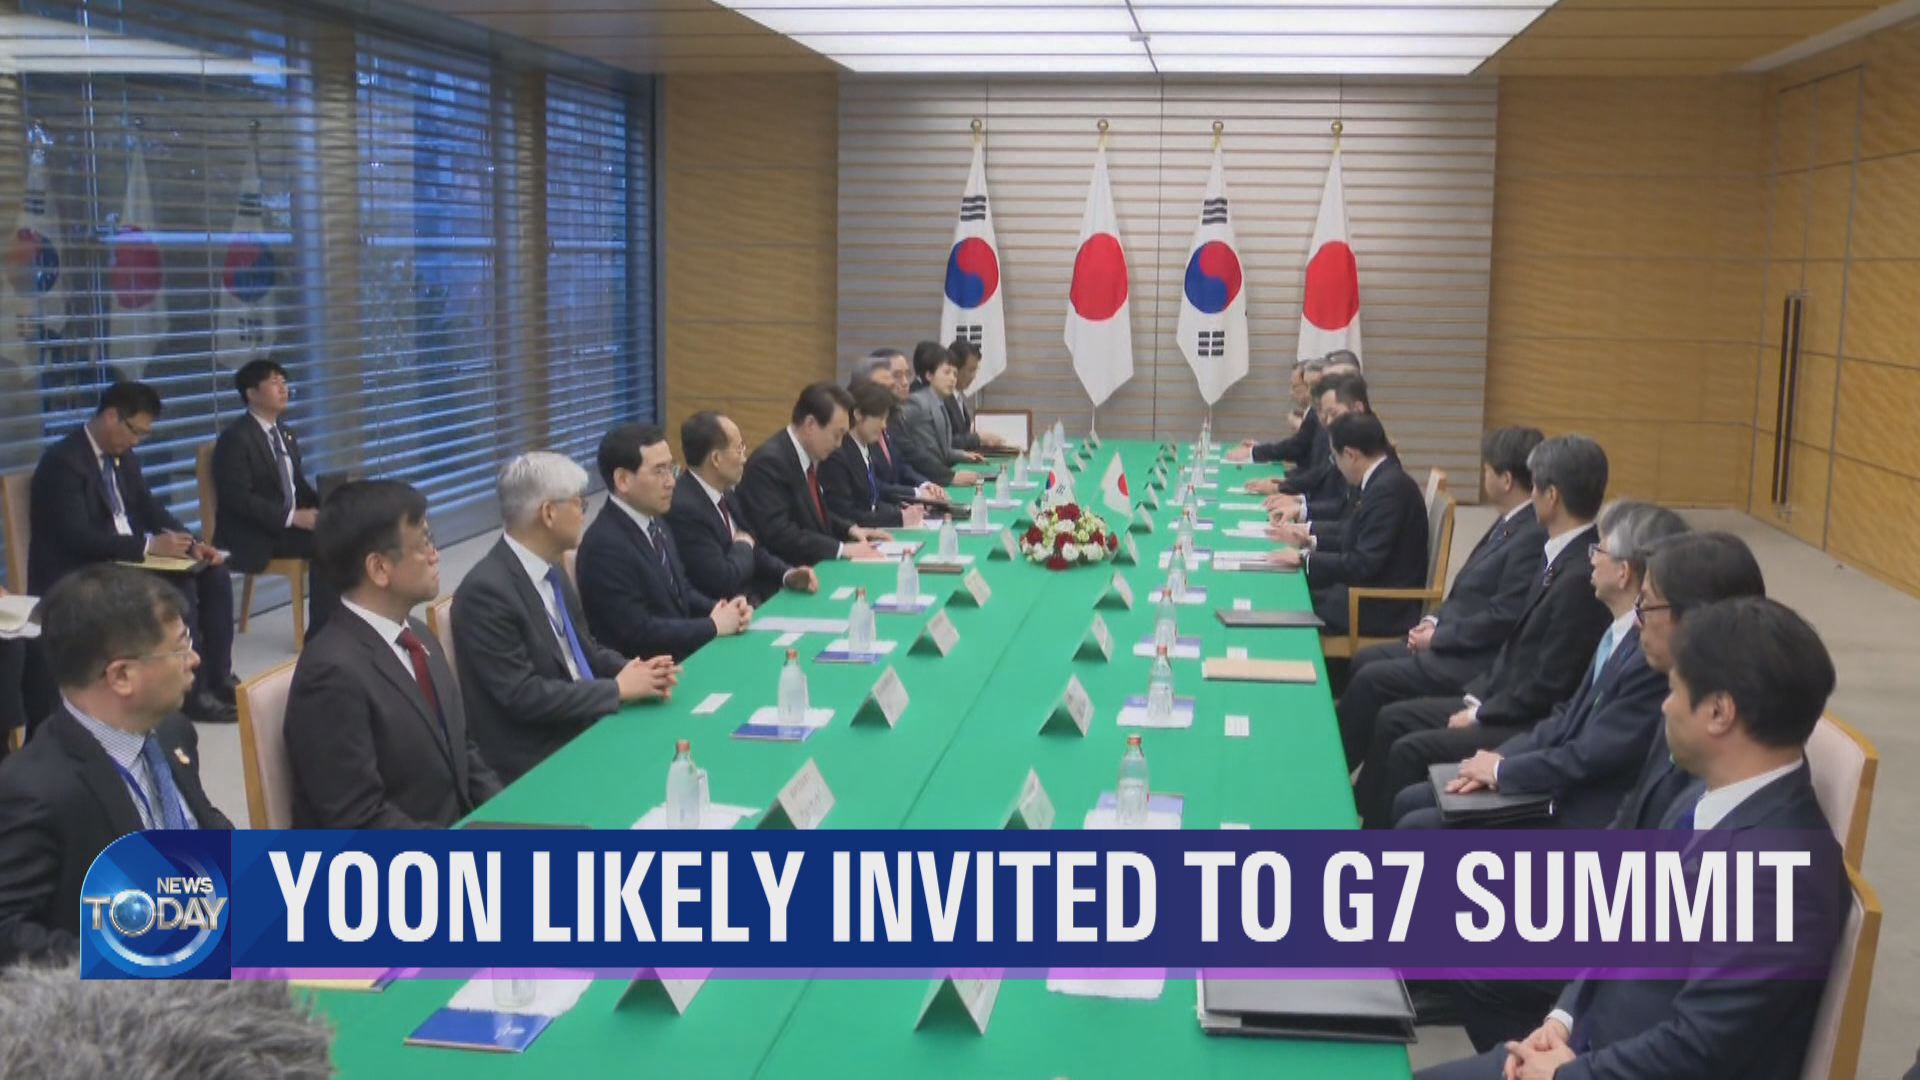 YOON LIKELY INVITED TO G7 SUMMIT